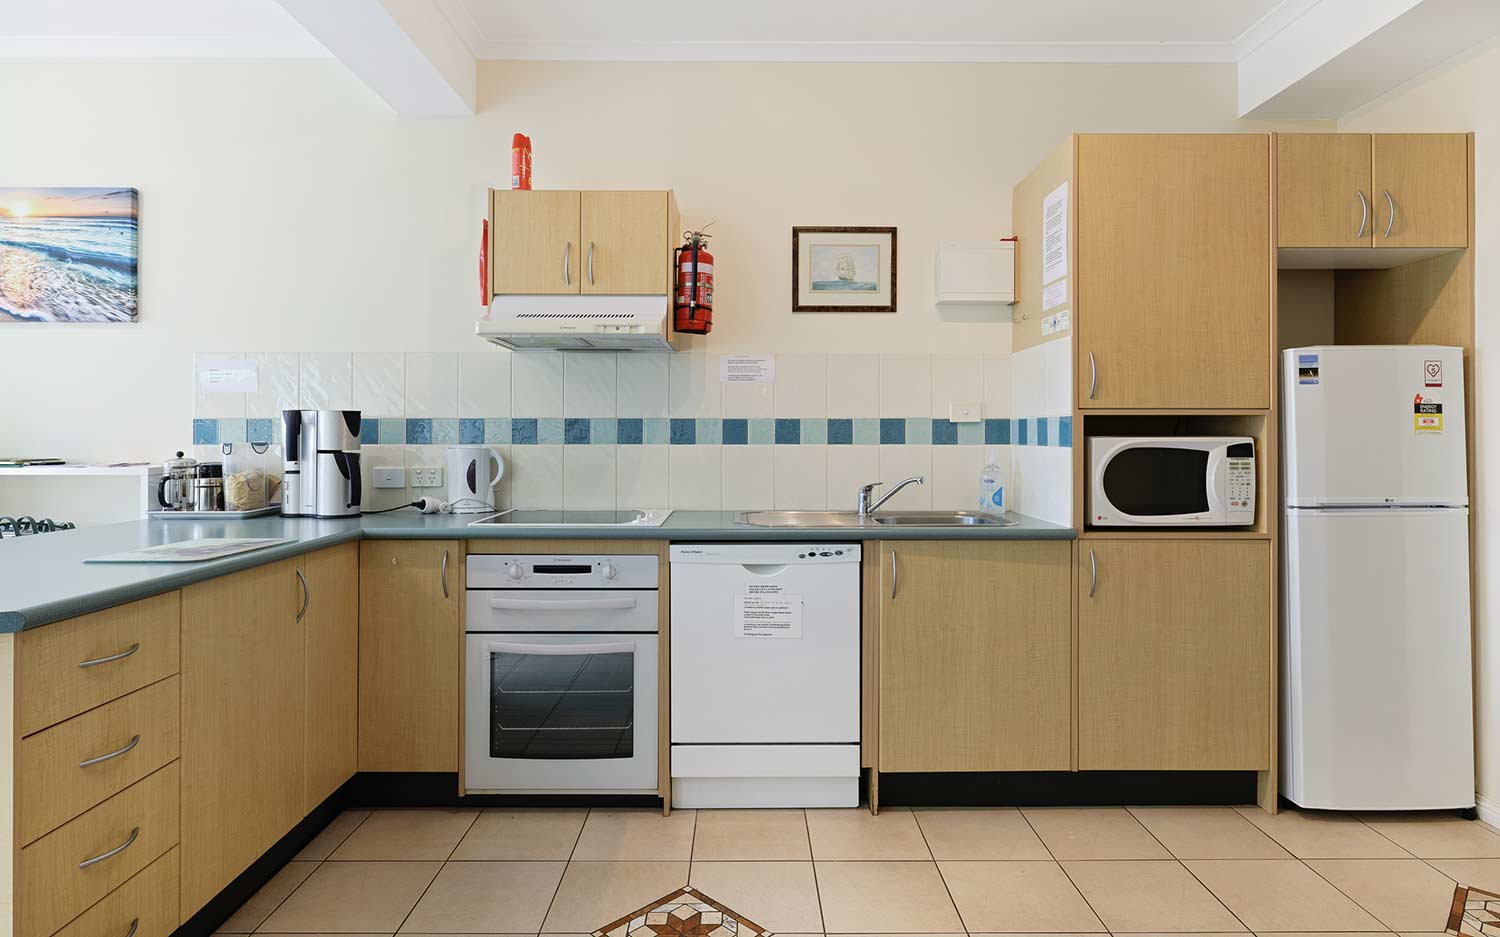 The Black Dolphin Apartment – the kitchen is well appointed with all appliances